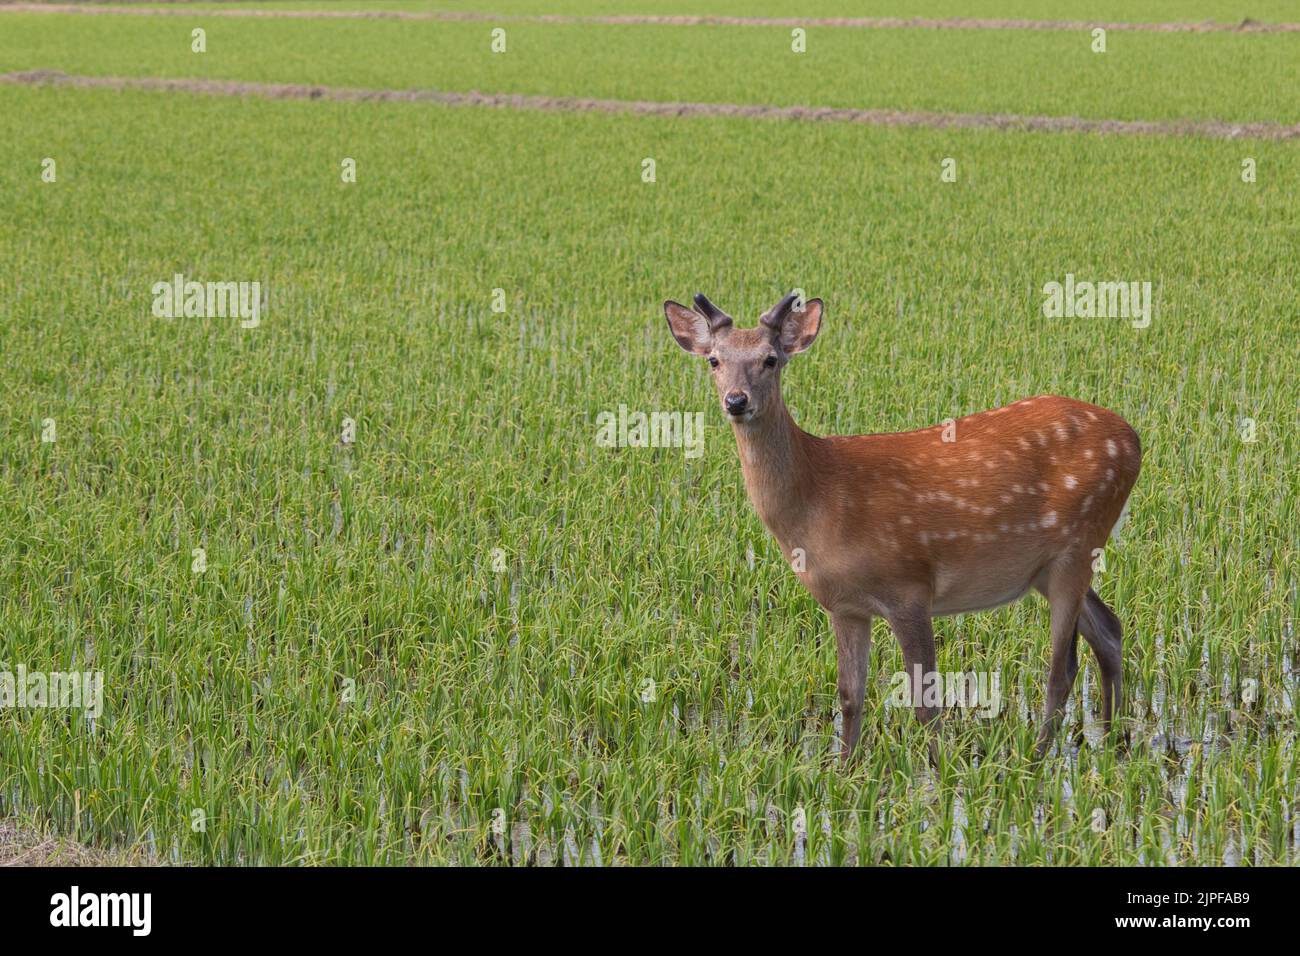 Deer standing in a rice field Stock Photo